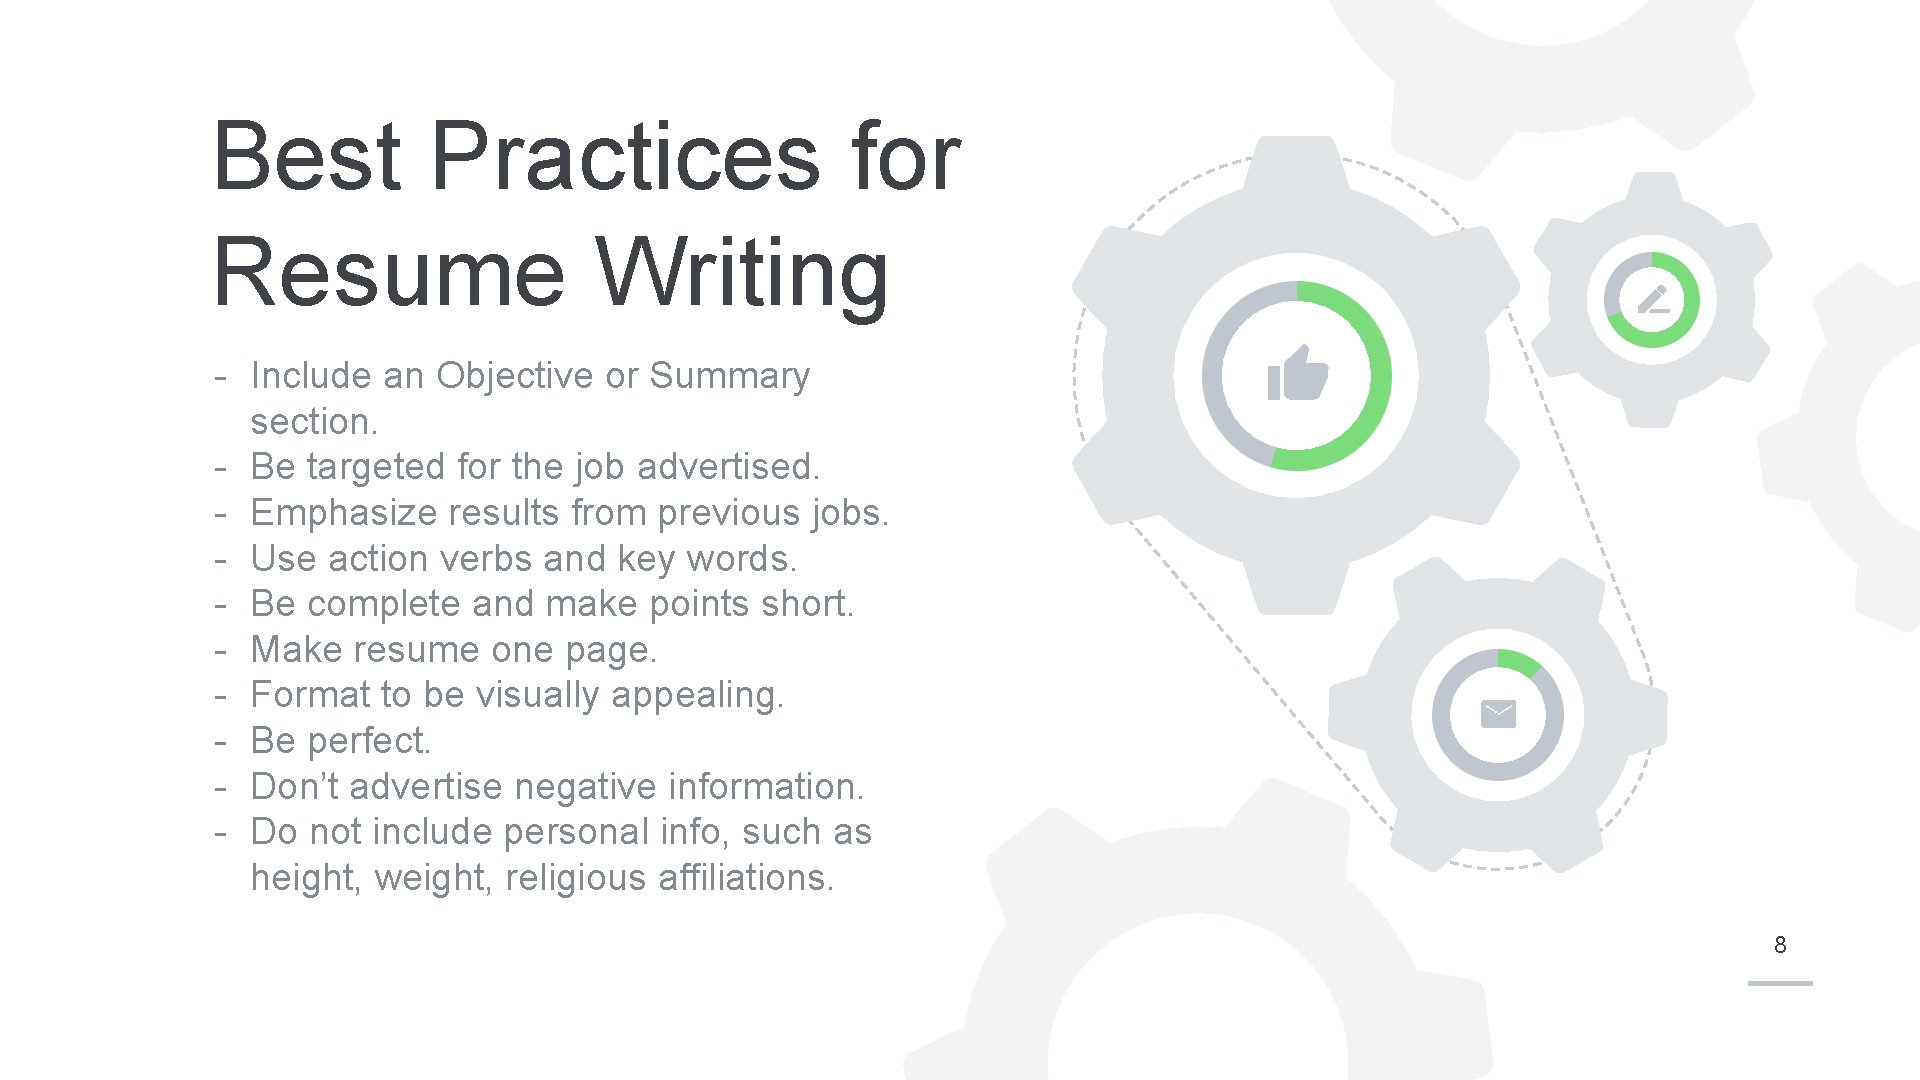 Best Practices for Resume Writing - Include an Objective or Summary section. - Be